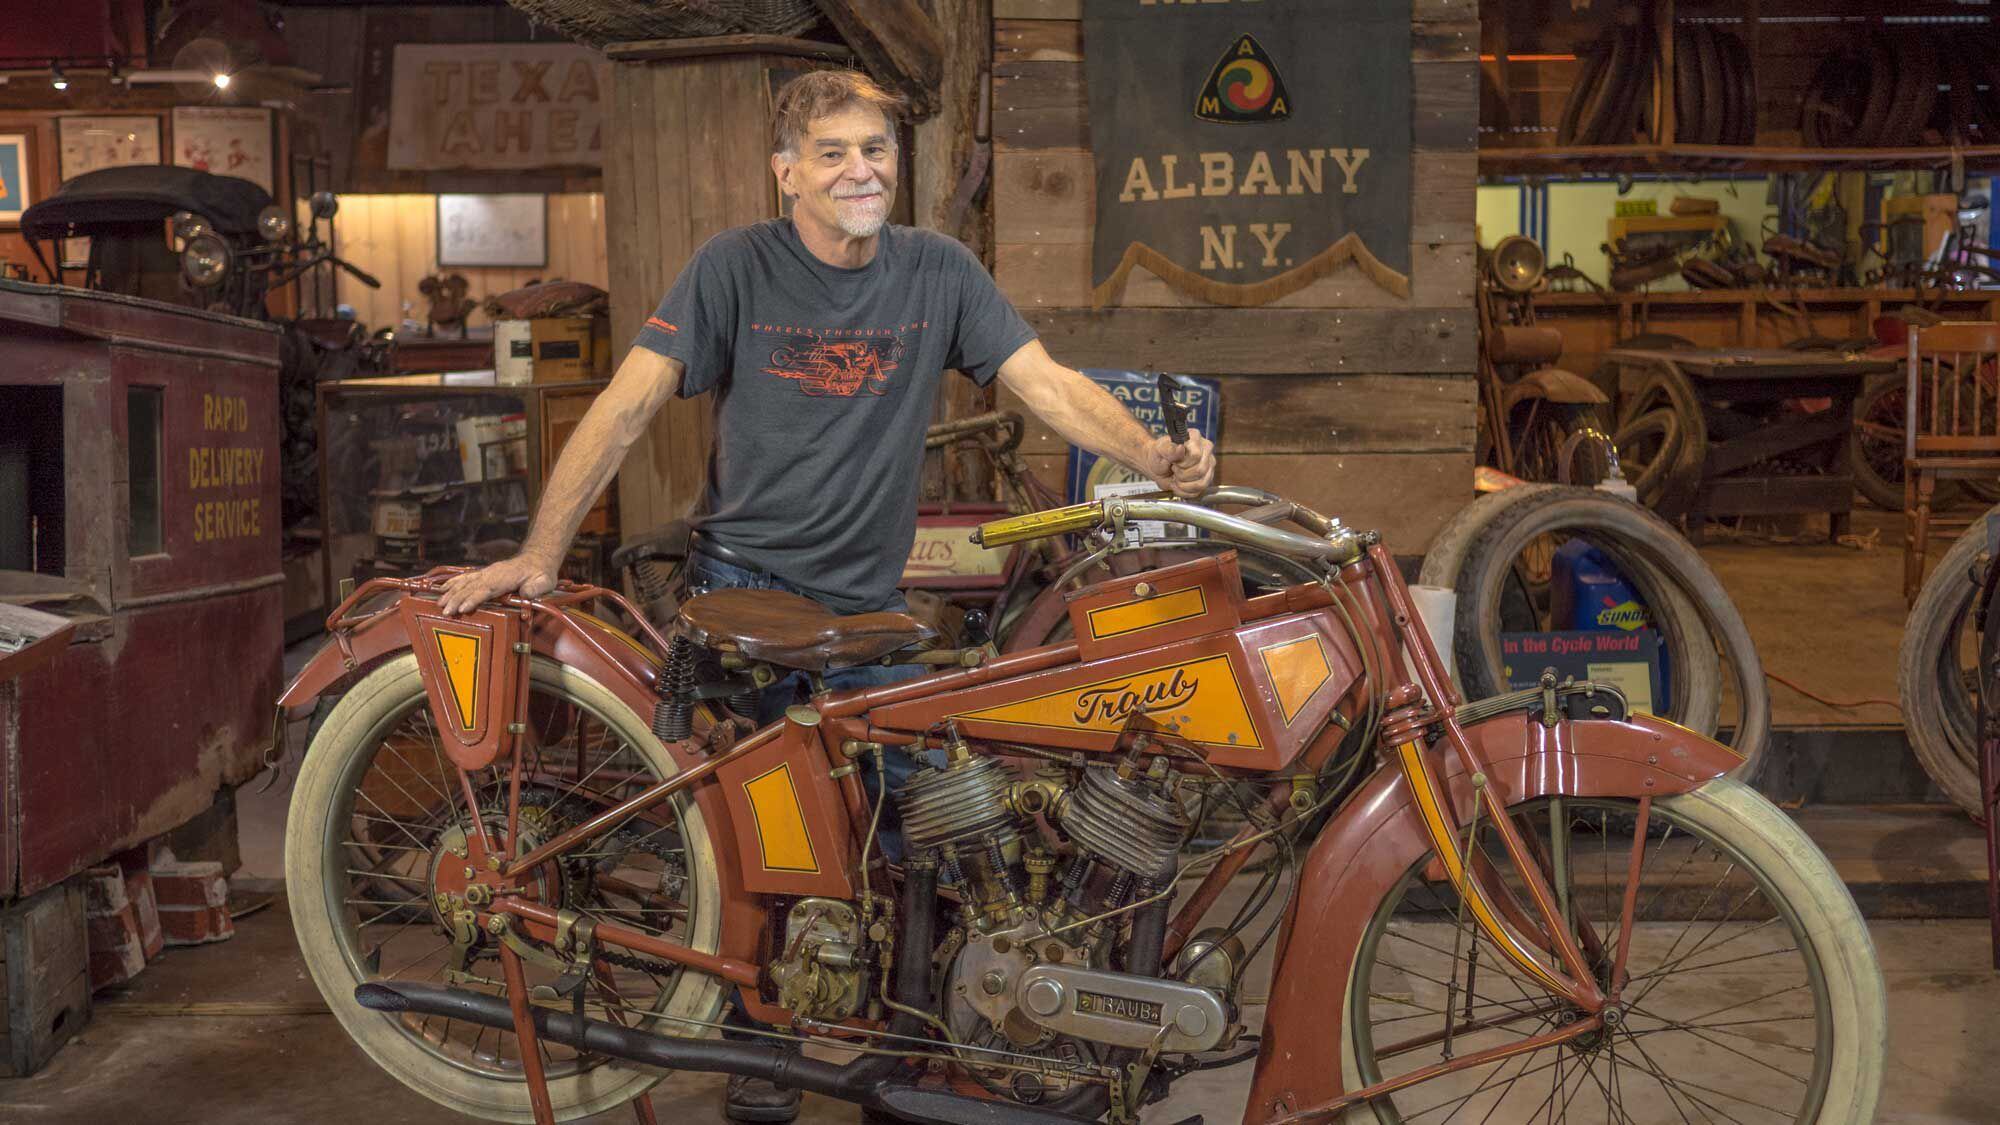 Dale Walksler with the 1916 Traub motorcycle found behind the wall of a building torn down in Chicago in 1967. Careful research has revealed that bike is a one-off machine completely custom built by one Reichard Traub, who designed and built/cast/machined every part of the motorcycle except for the seat, carburetor, magneto, and wheels. The craftsmanship is remarkable; even more incredible is that in 1916 Traub had built an 80ci engine some 20 years before Harley and Indian. It is unknown why Traub hid the bike and why he never sought to mass-produce the machine.